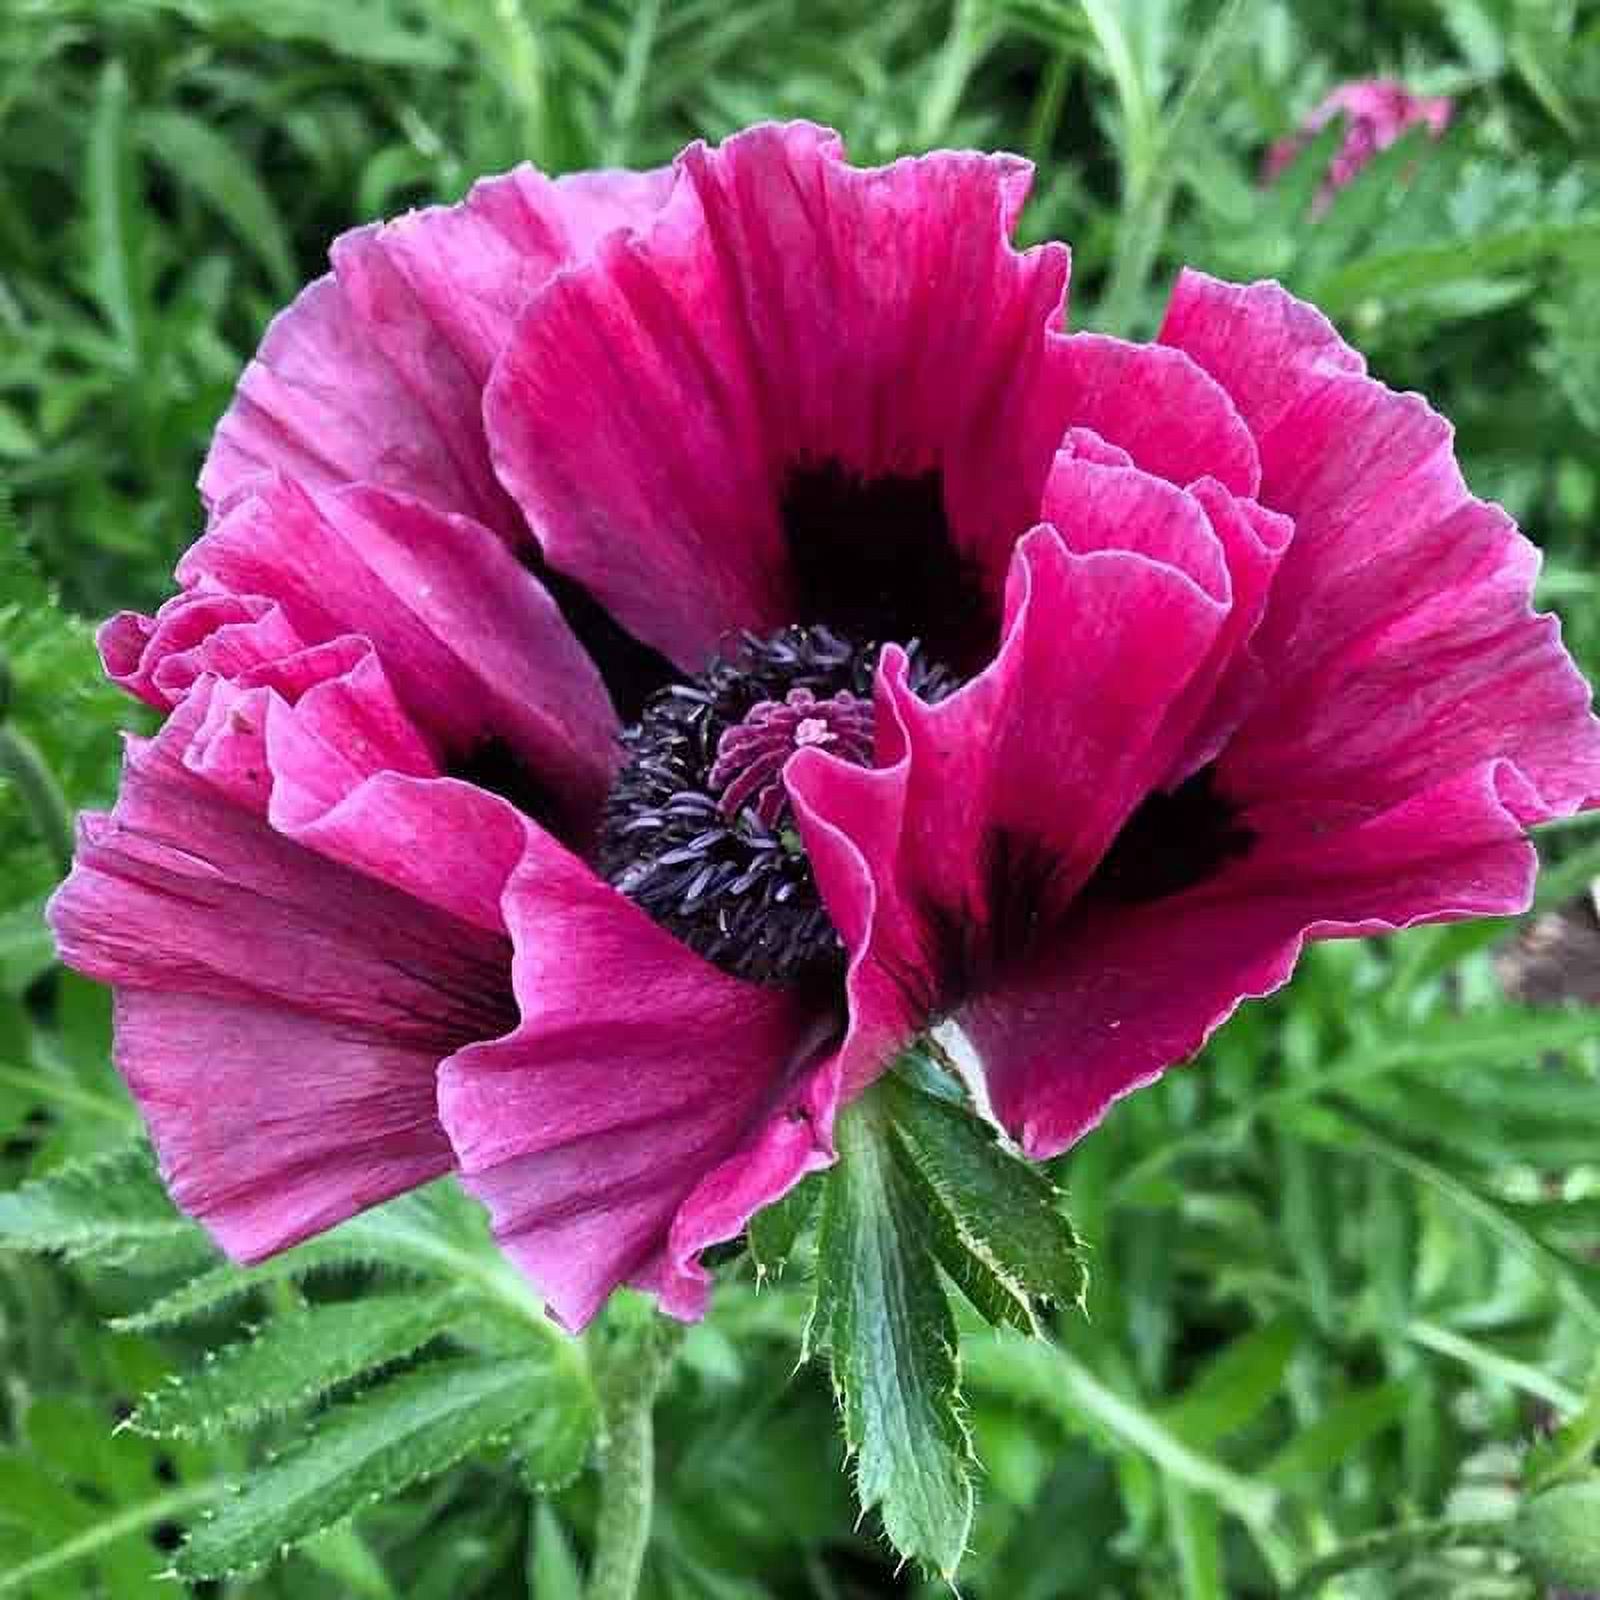 Papaver orientale Roots - Harlem - 10 Roots - Red Flower Bulbs,  Root  Attracts Butterflies, Attracts Pollinators, Easy to Grow & Maintain, Container Garden - image 2 of 4